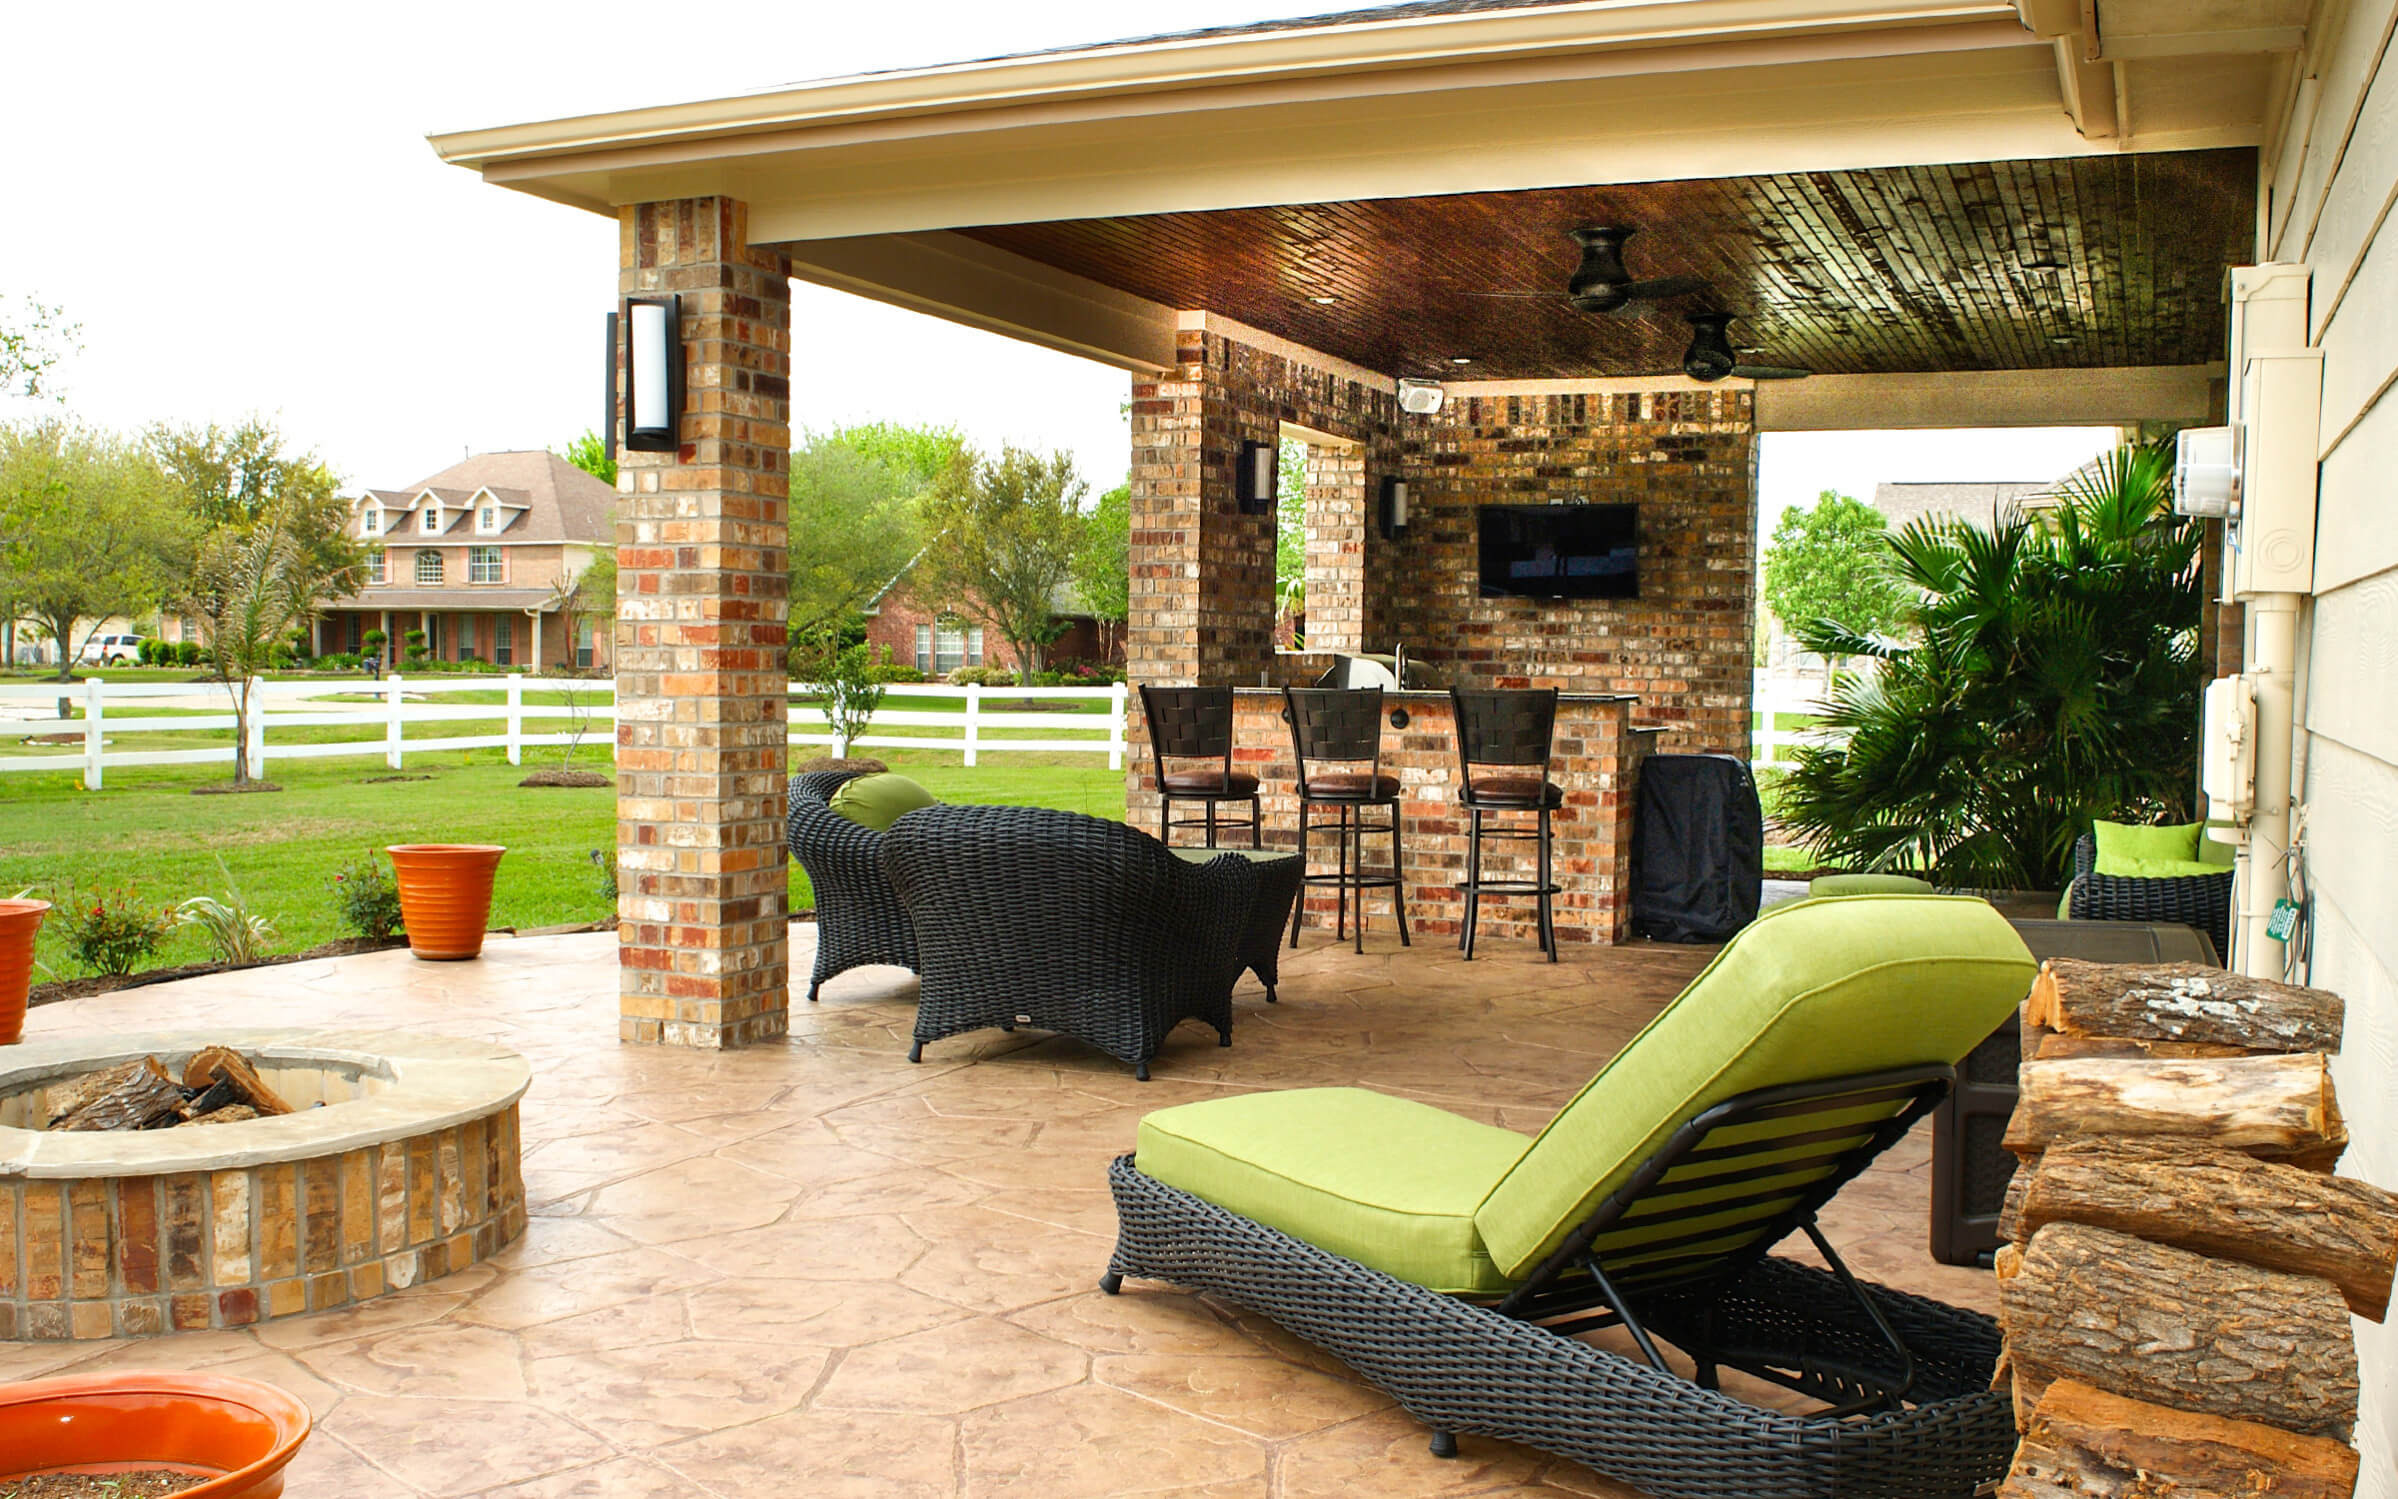 Outdoor Kitchen And Patio
 Patio Cover & Outdoor Kitchen in Pearland Estates Texas